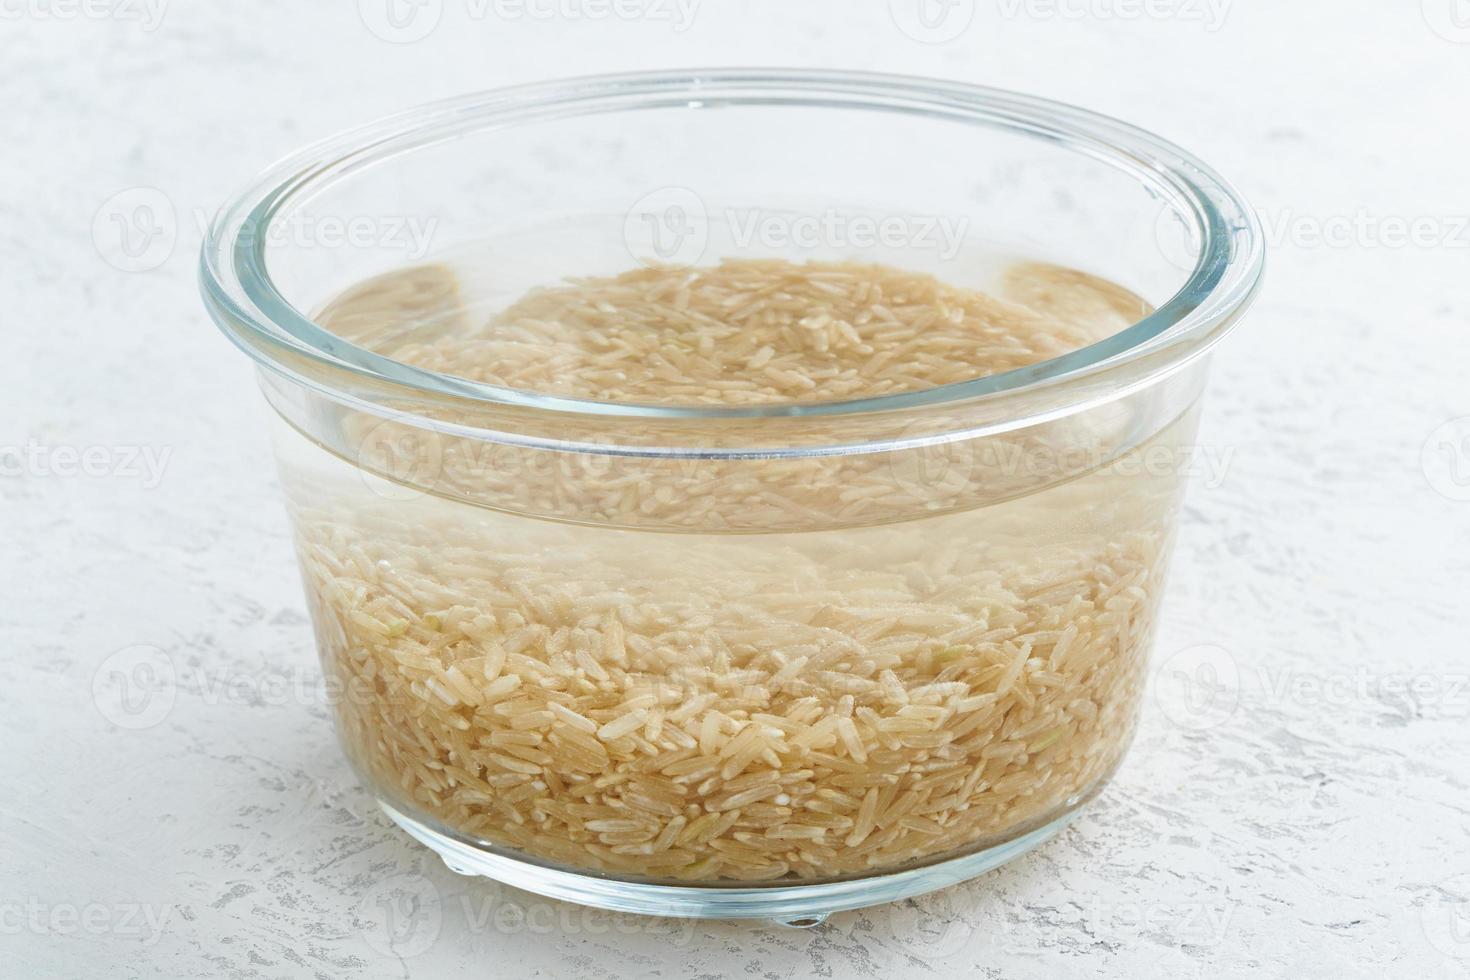 Soaking brown rice cereal in water to ferment cereals and neutralize phytic acid photo